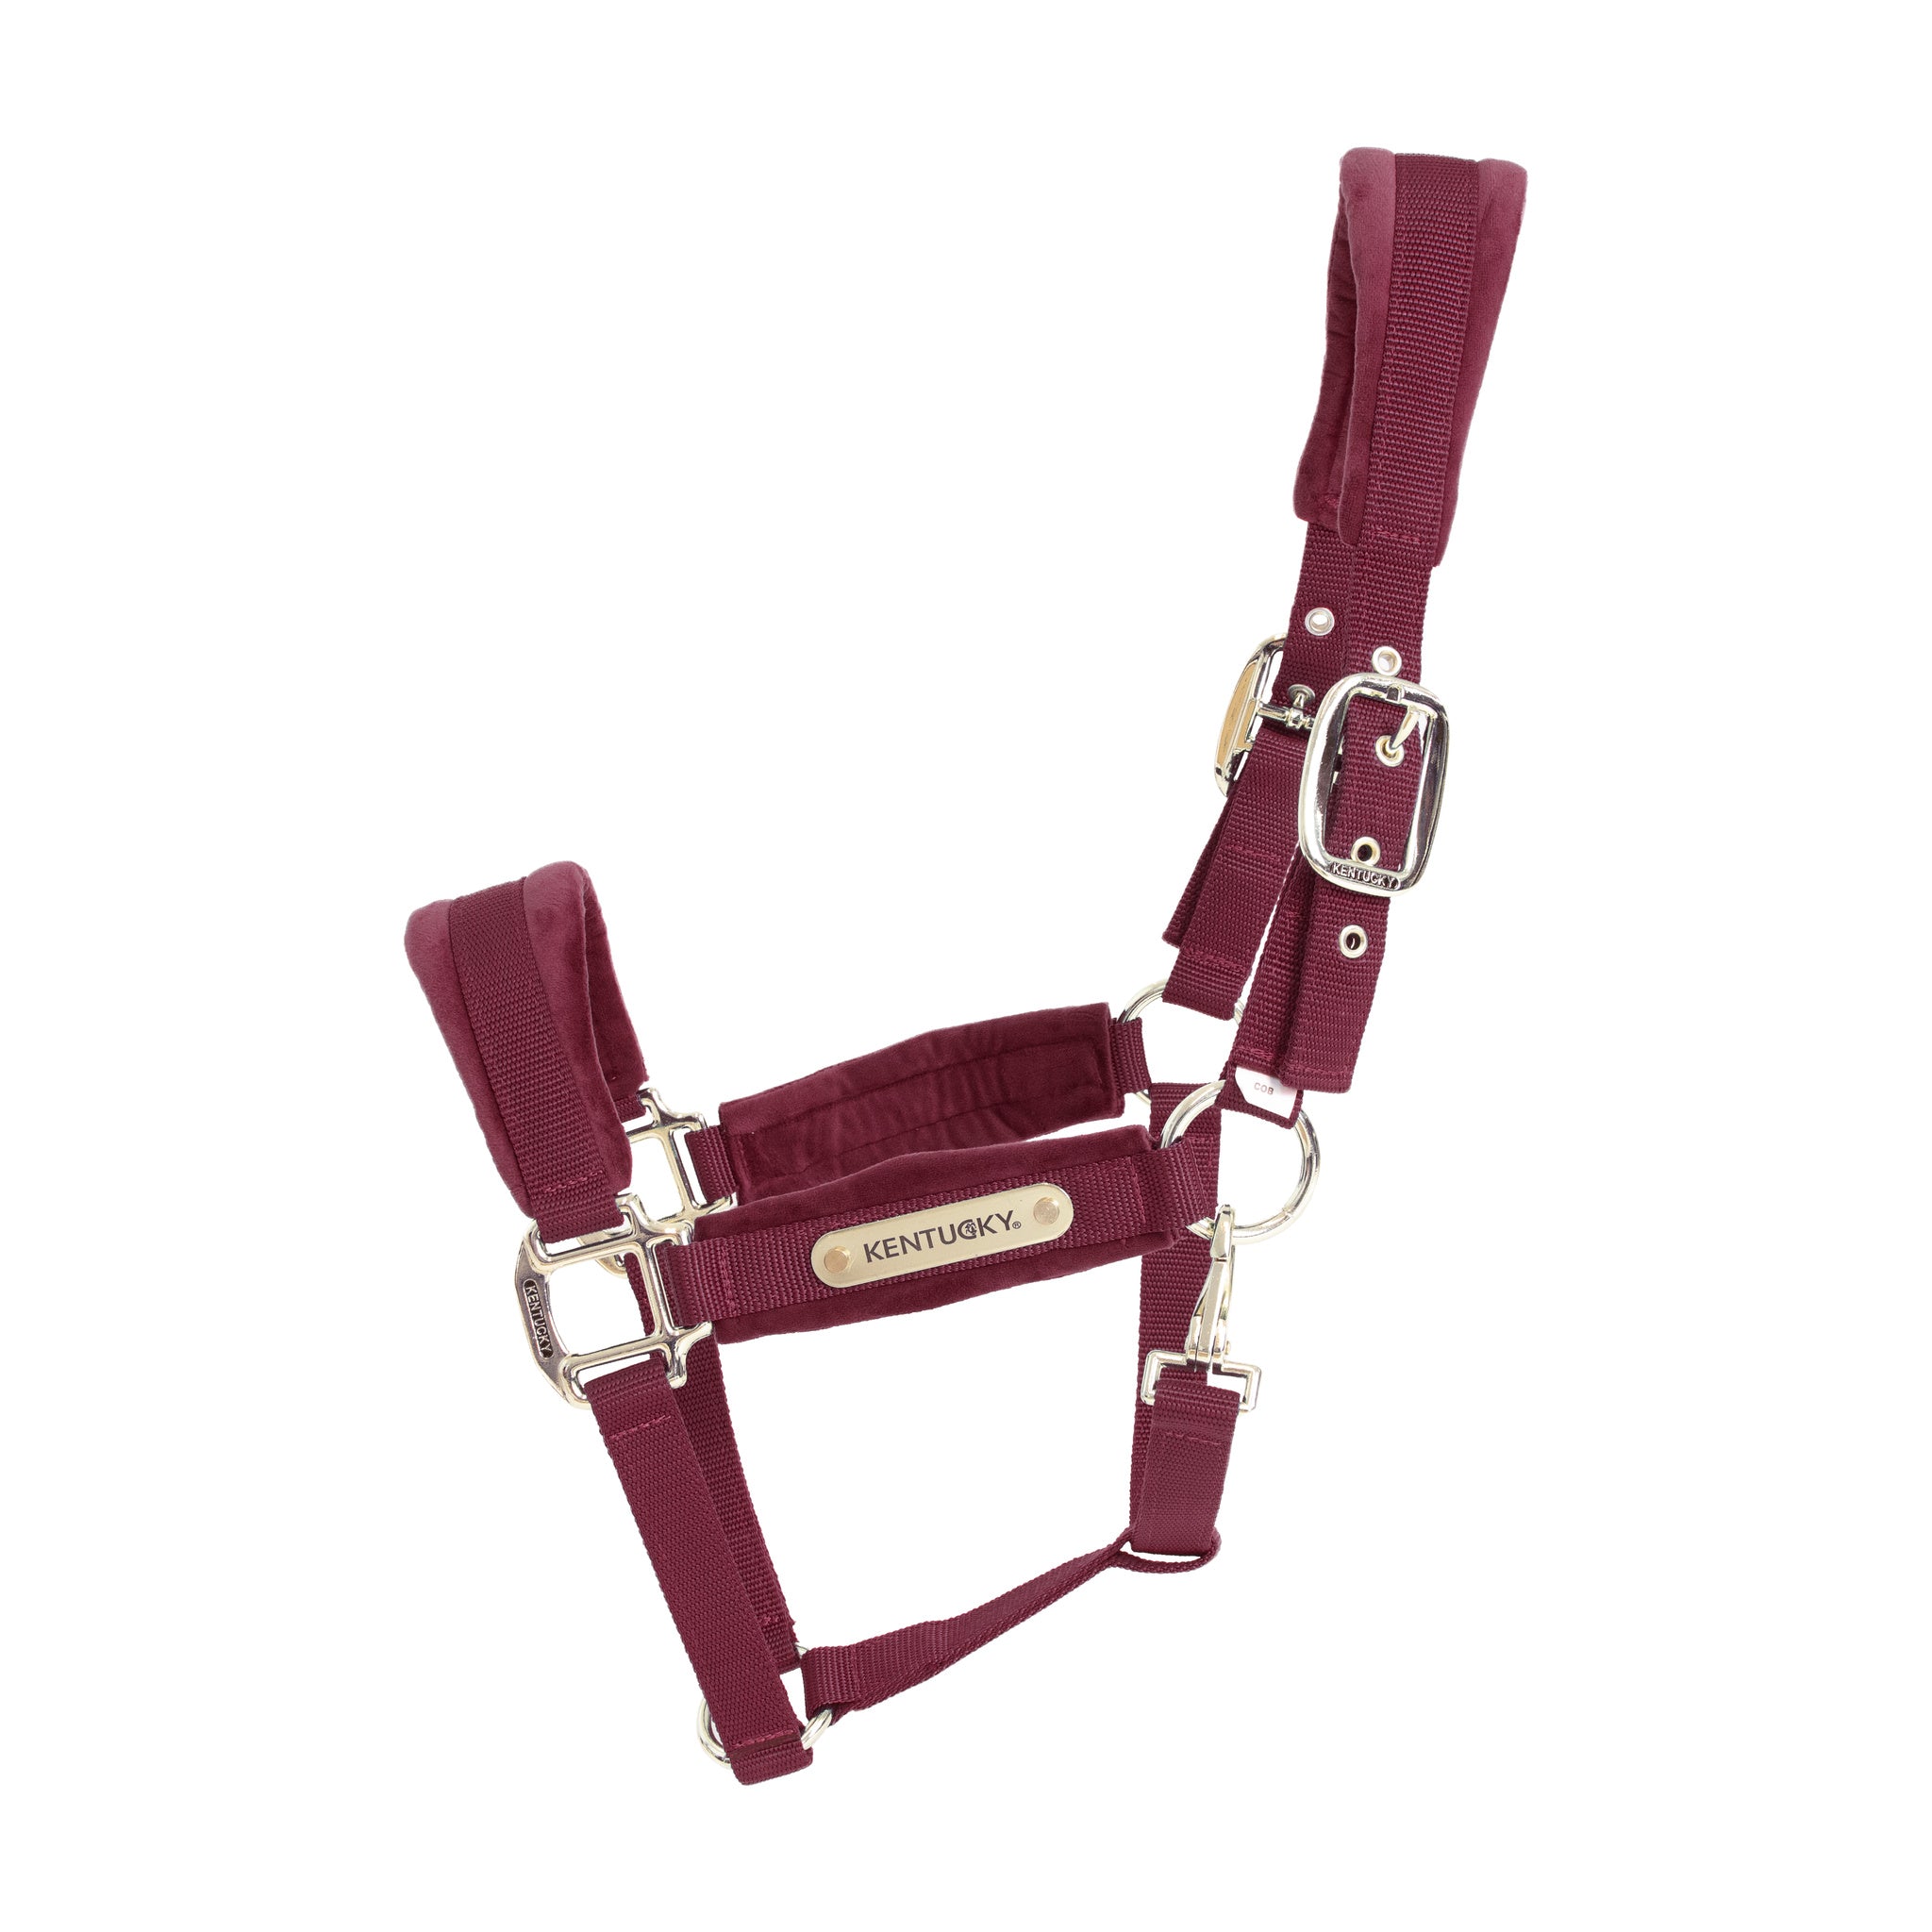 Strong nylon head collar with velvet detailing and a gold plate that can be personalised.